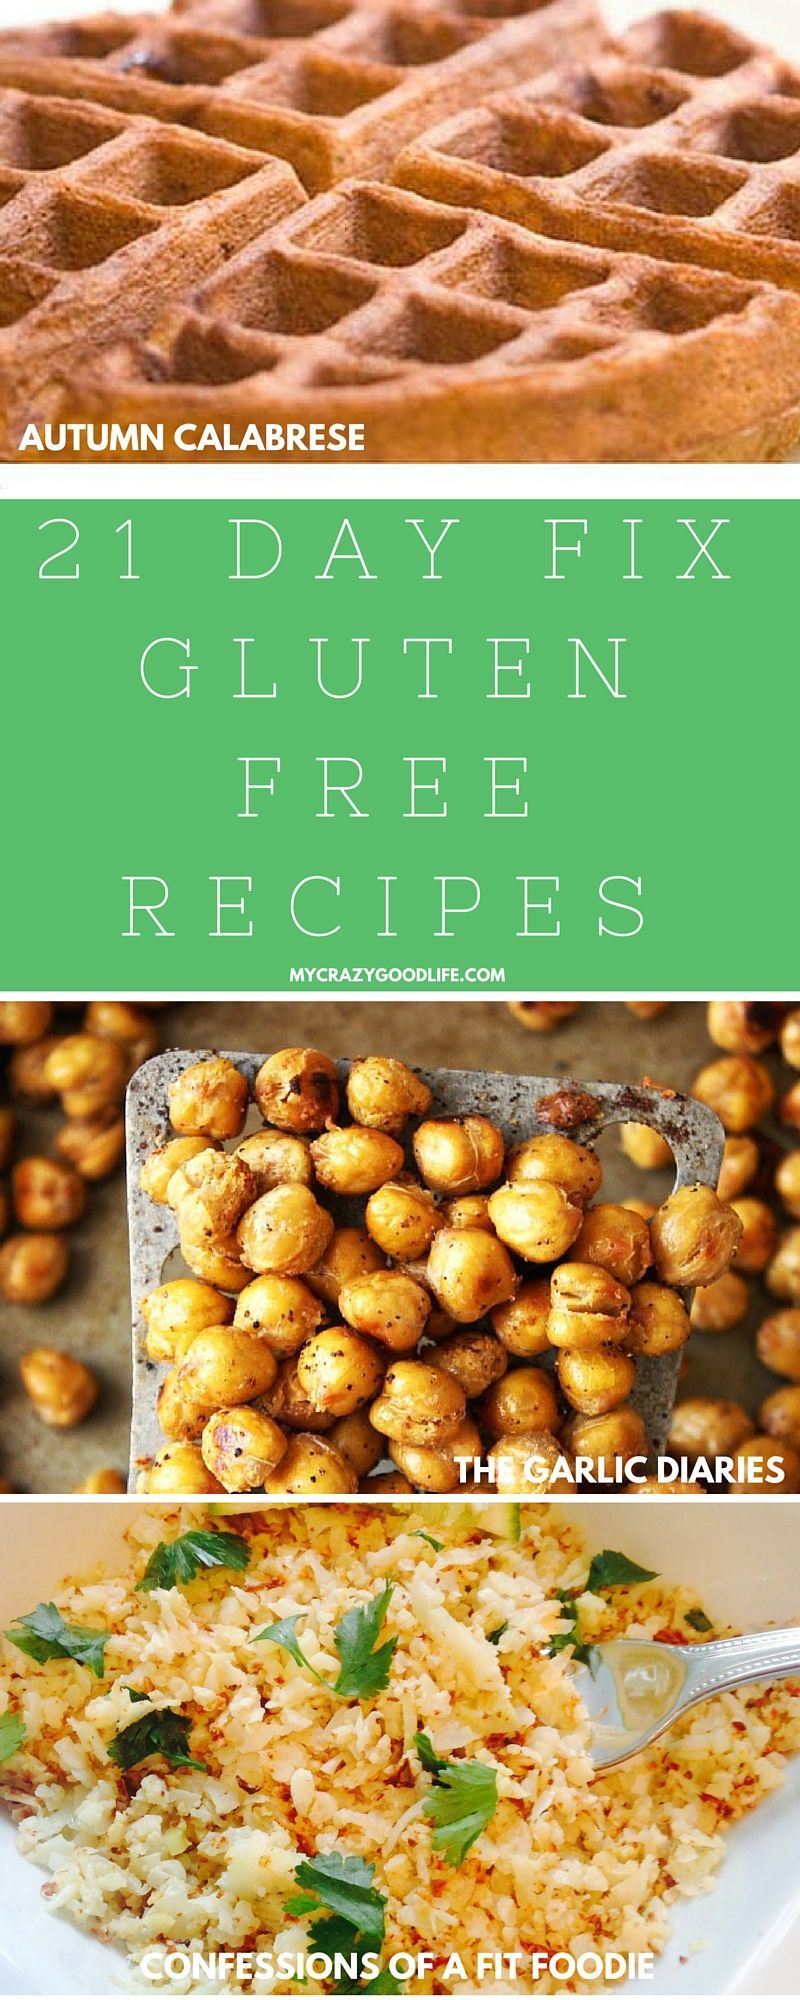 These 21 Day Fix Gluten Free recipes will help you stay on track without struggling to alter recipes to fit your gluten free